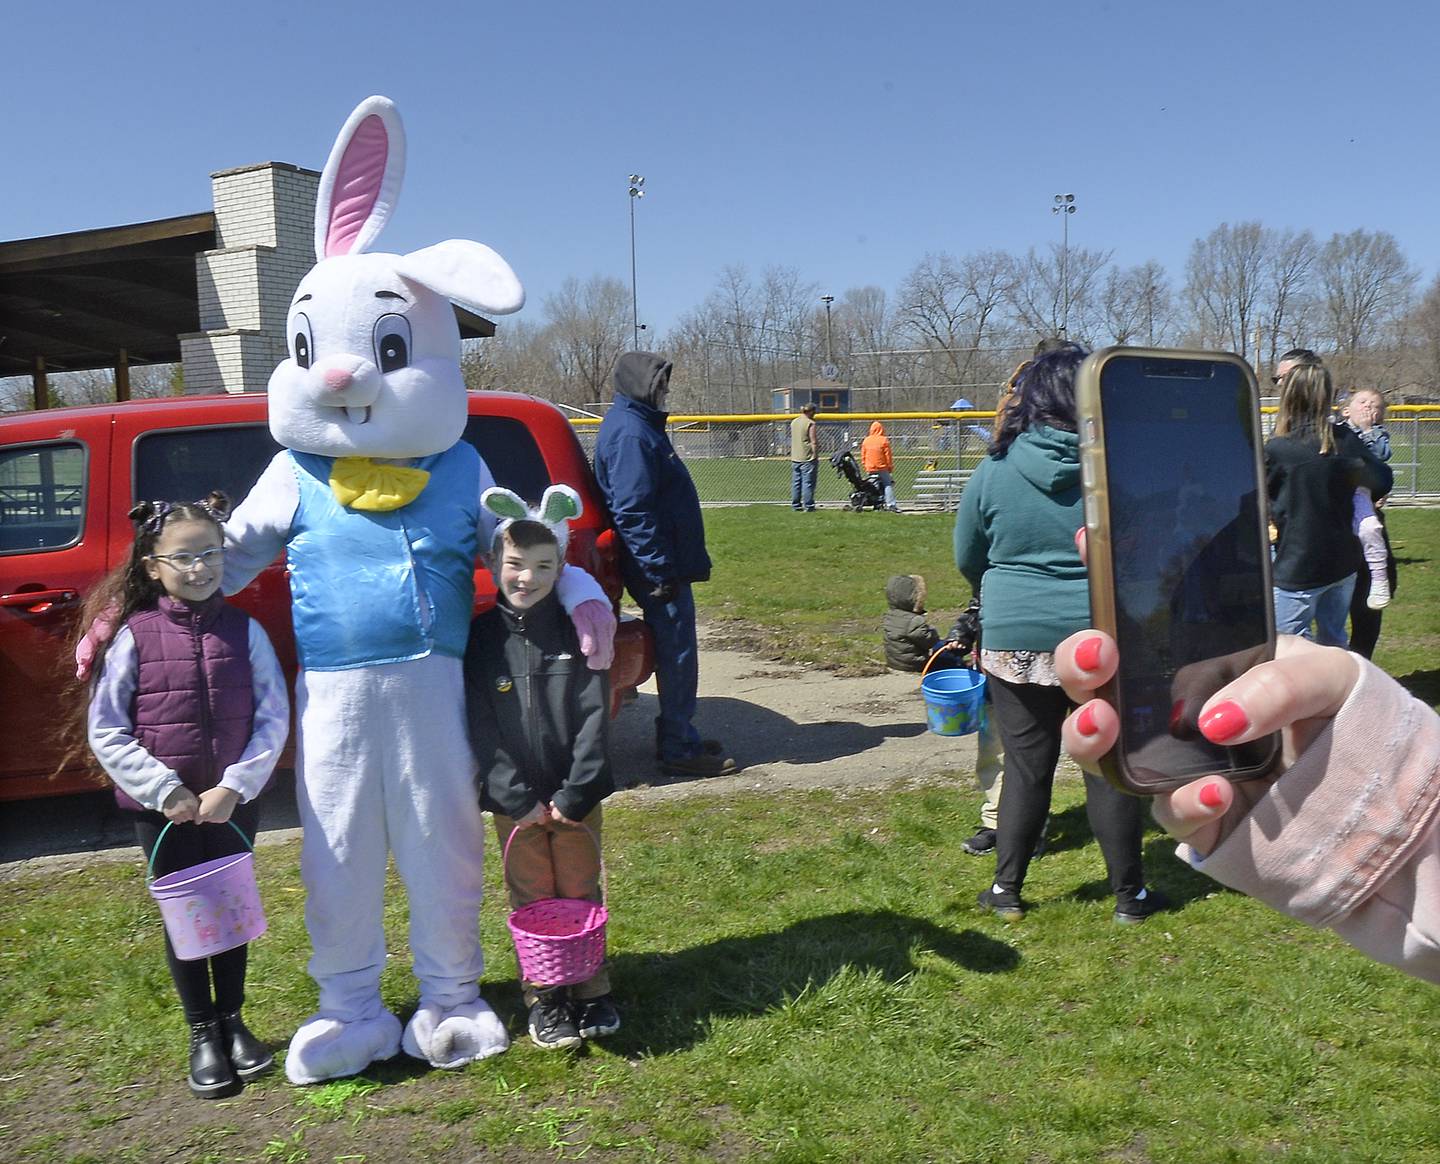 After the Easter egg hunt Saturday, April 16, 2022, at Danny Carey Memorial Park in Utica, the Easter Bunny was on hand to pose for photos.